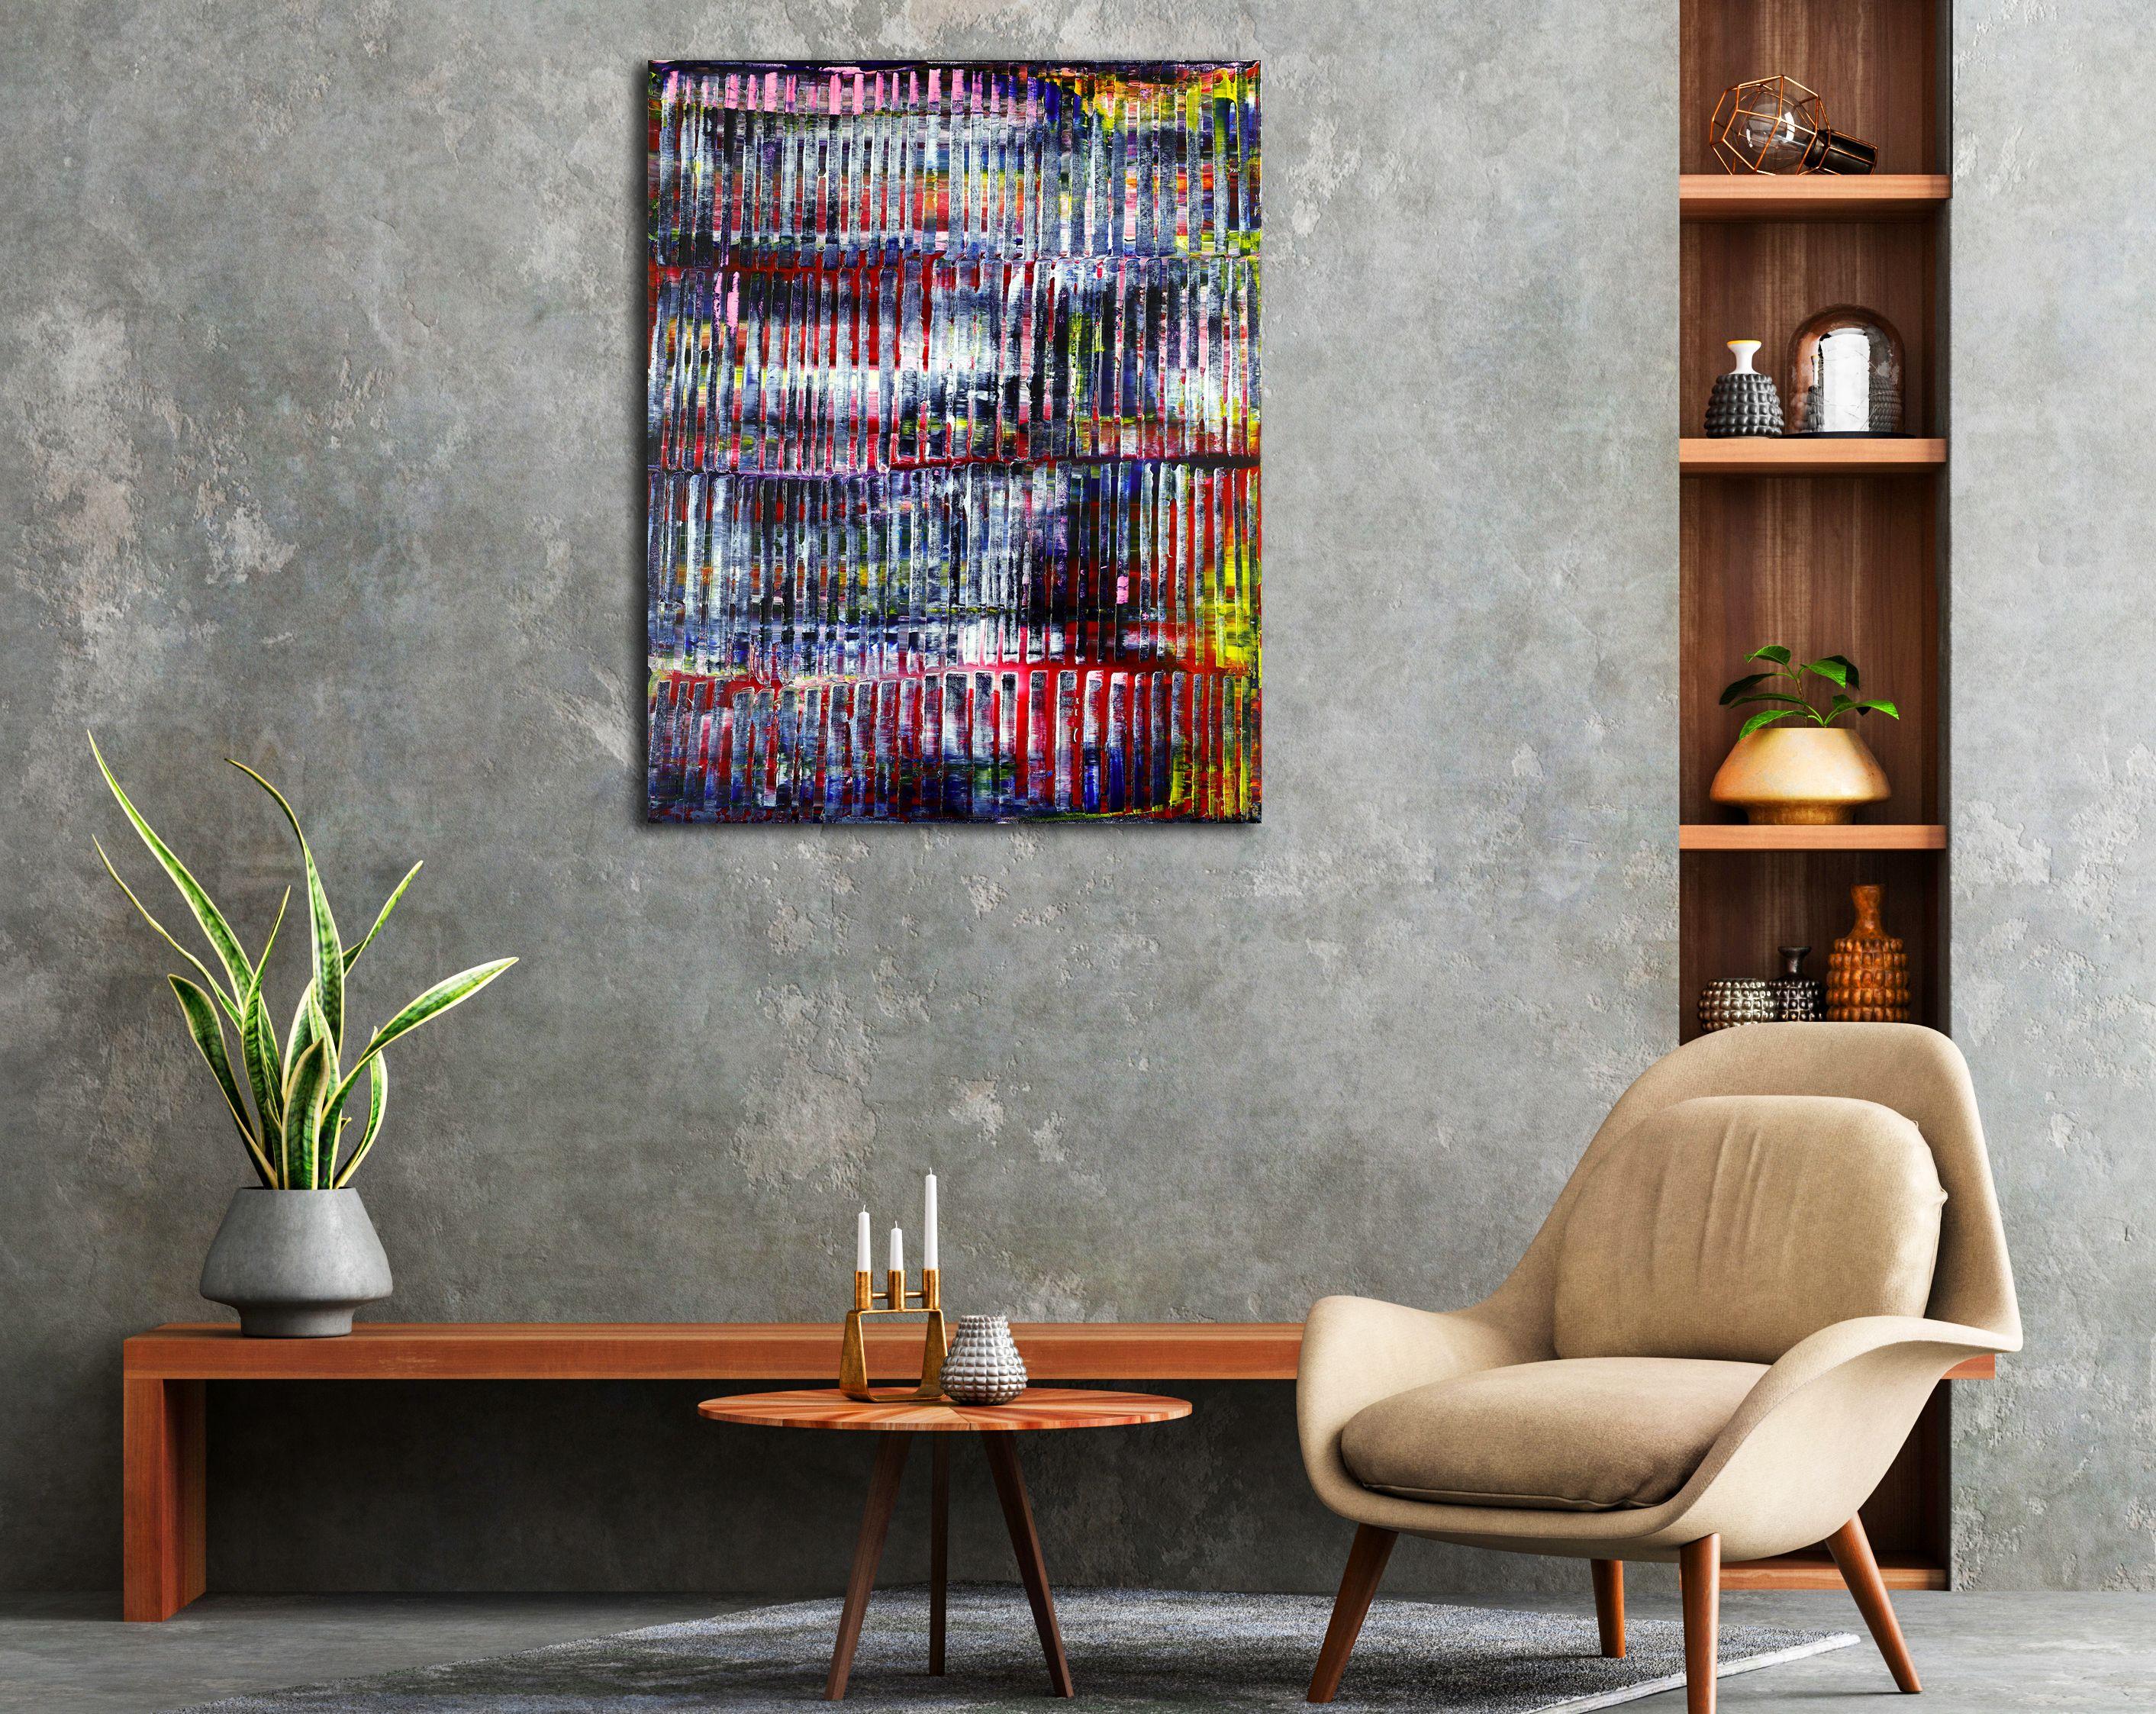 abstract minimalist painting  acrylic on canvas  Inspired by nature    This artwork was created layering and blending thin layers of many colors, yellow, white, pink, blue, magenta, purple and other hues.    Ready to hang    I include a certificate